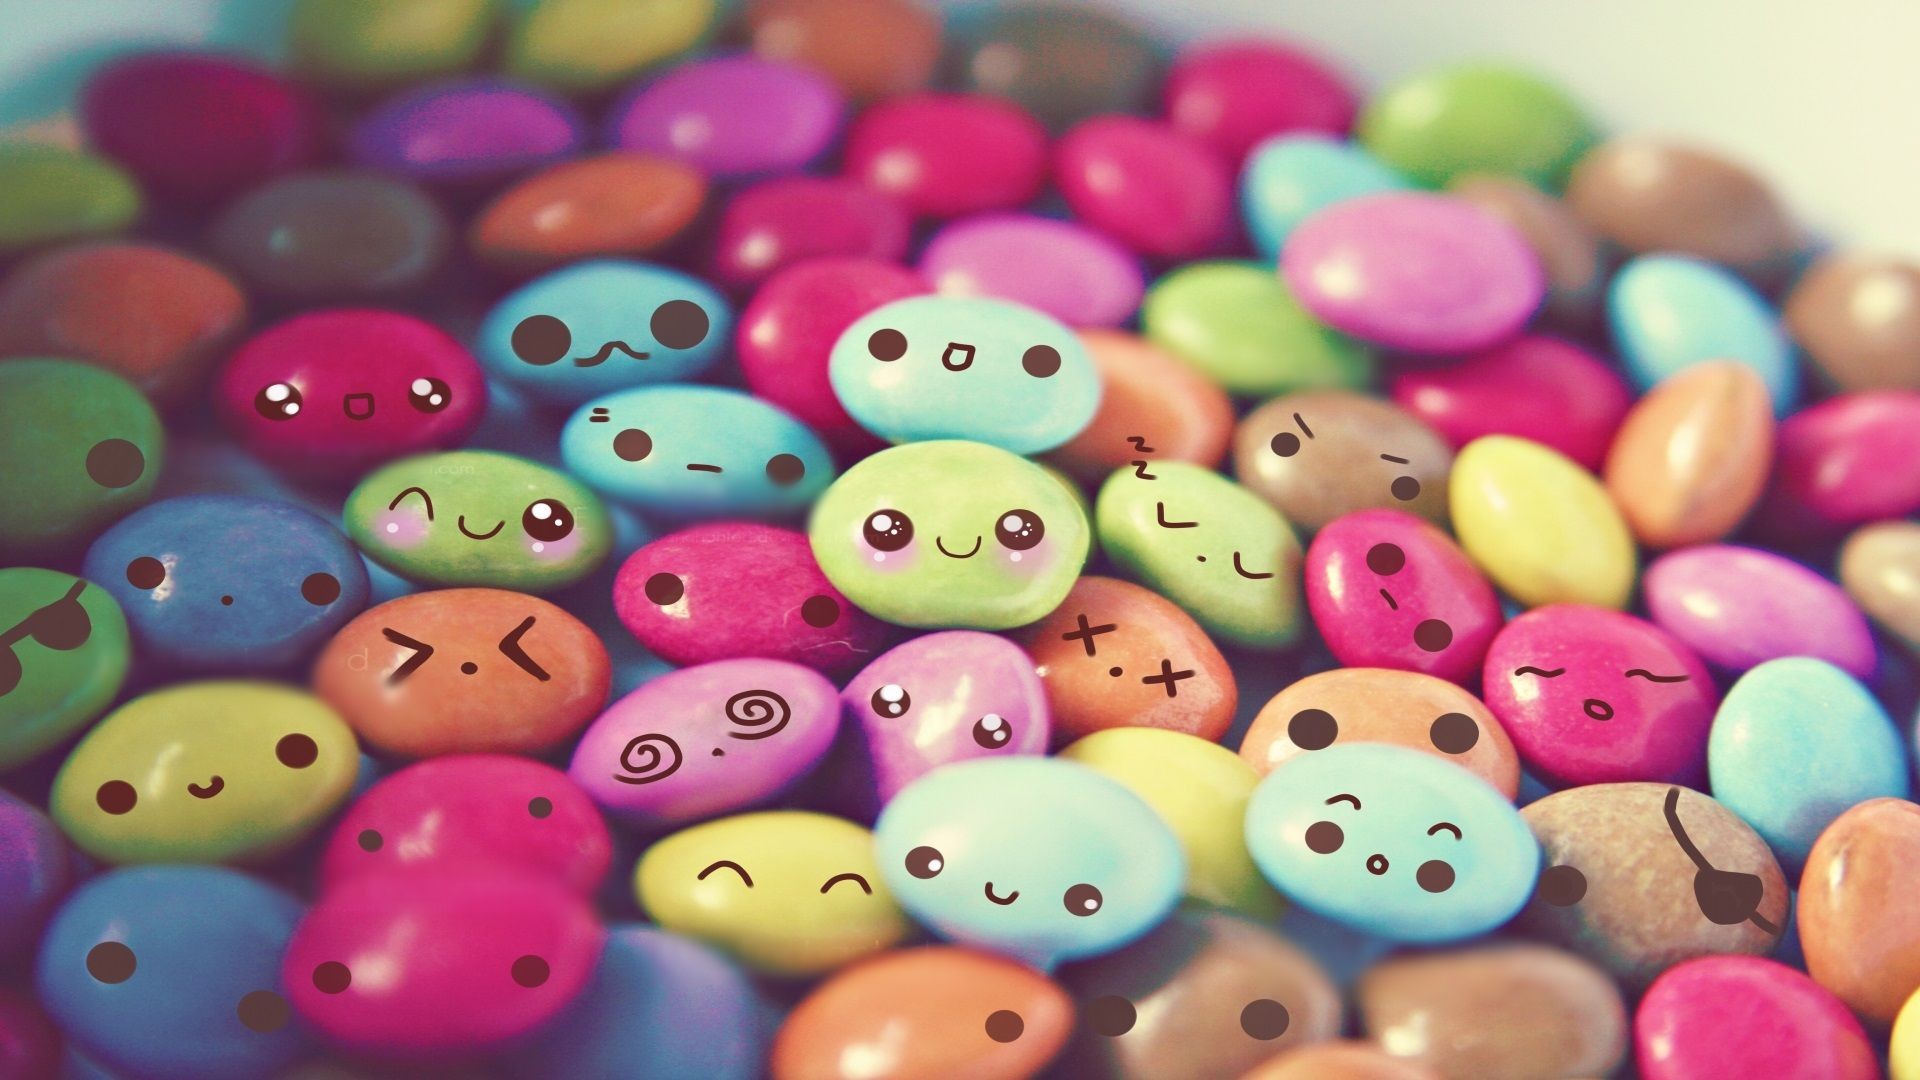  Candy wallpaper Download free cool High Resolution 